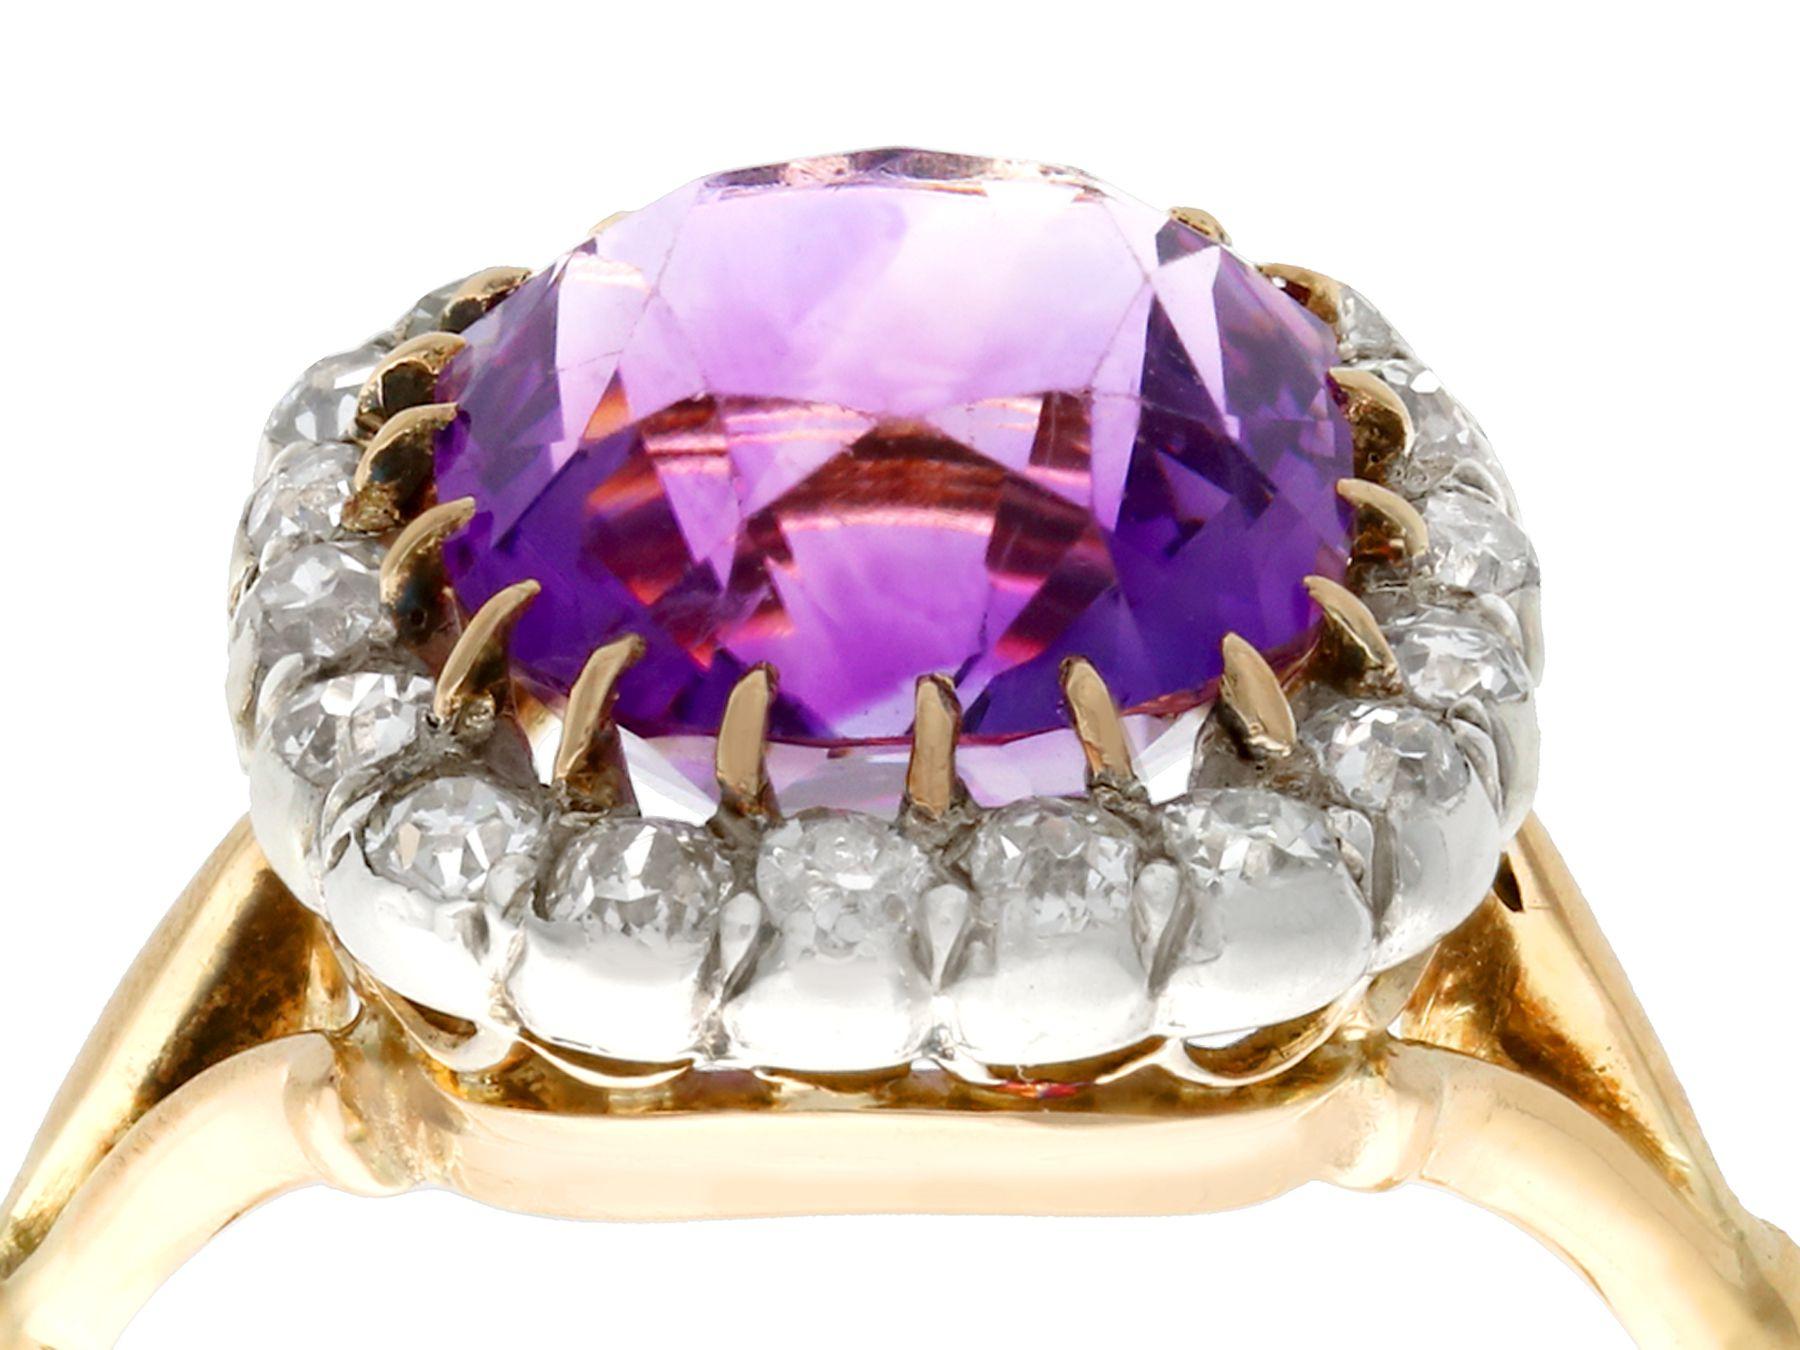 A stunning antique Victorian 4.20 carat amethyst and 0.48 carat diamond, 18 karat yellow and white gold dress ring; part of our diverse antique jewelry and estate jewelry collections.

This stunning, fine and impressive antique amethyst ring has